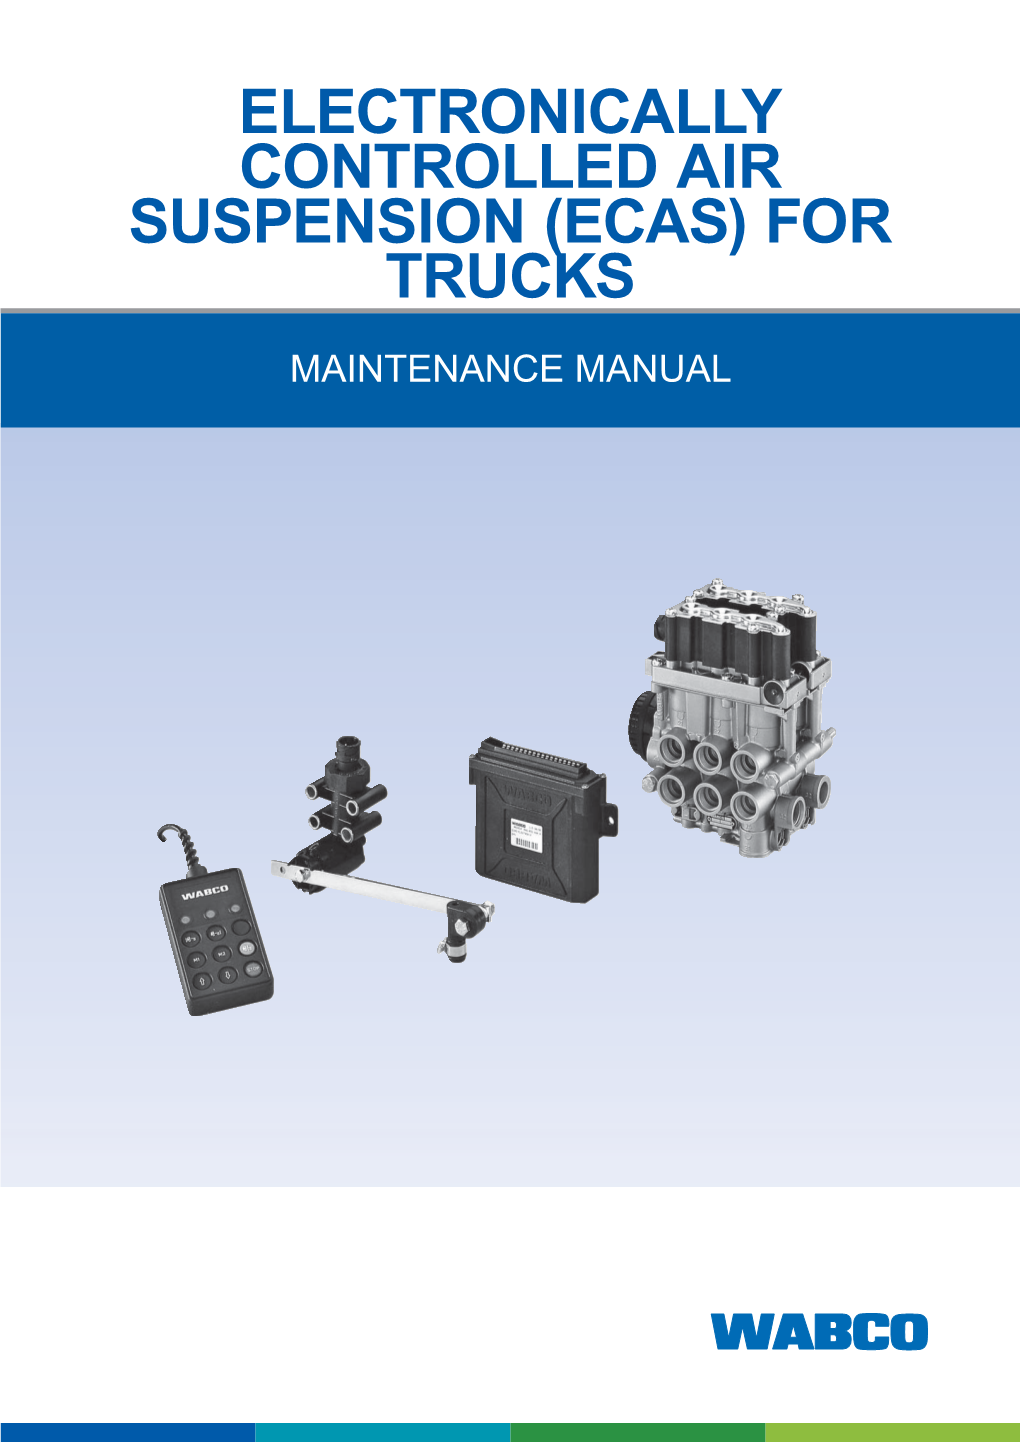 Electronically Controlled Air Suspension (Ecas) for Trucks